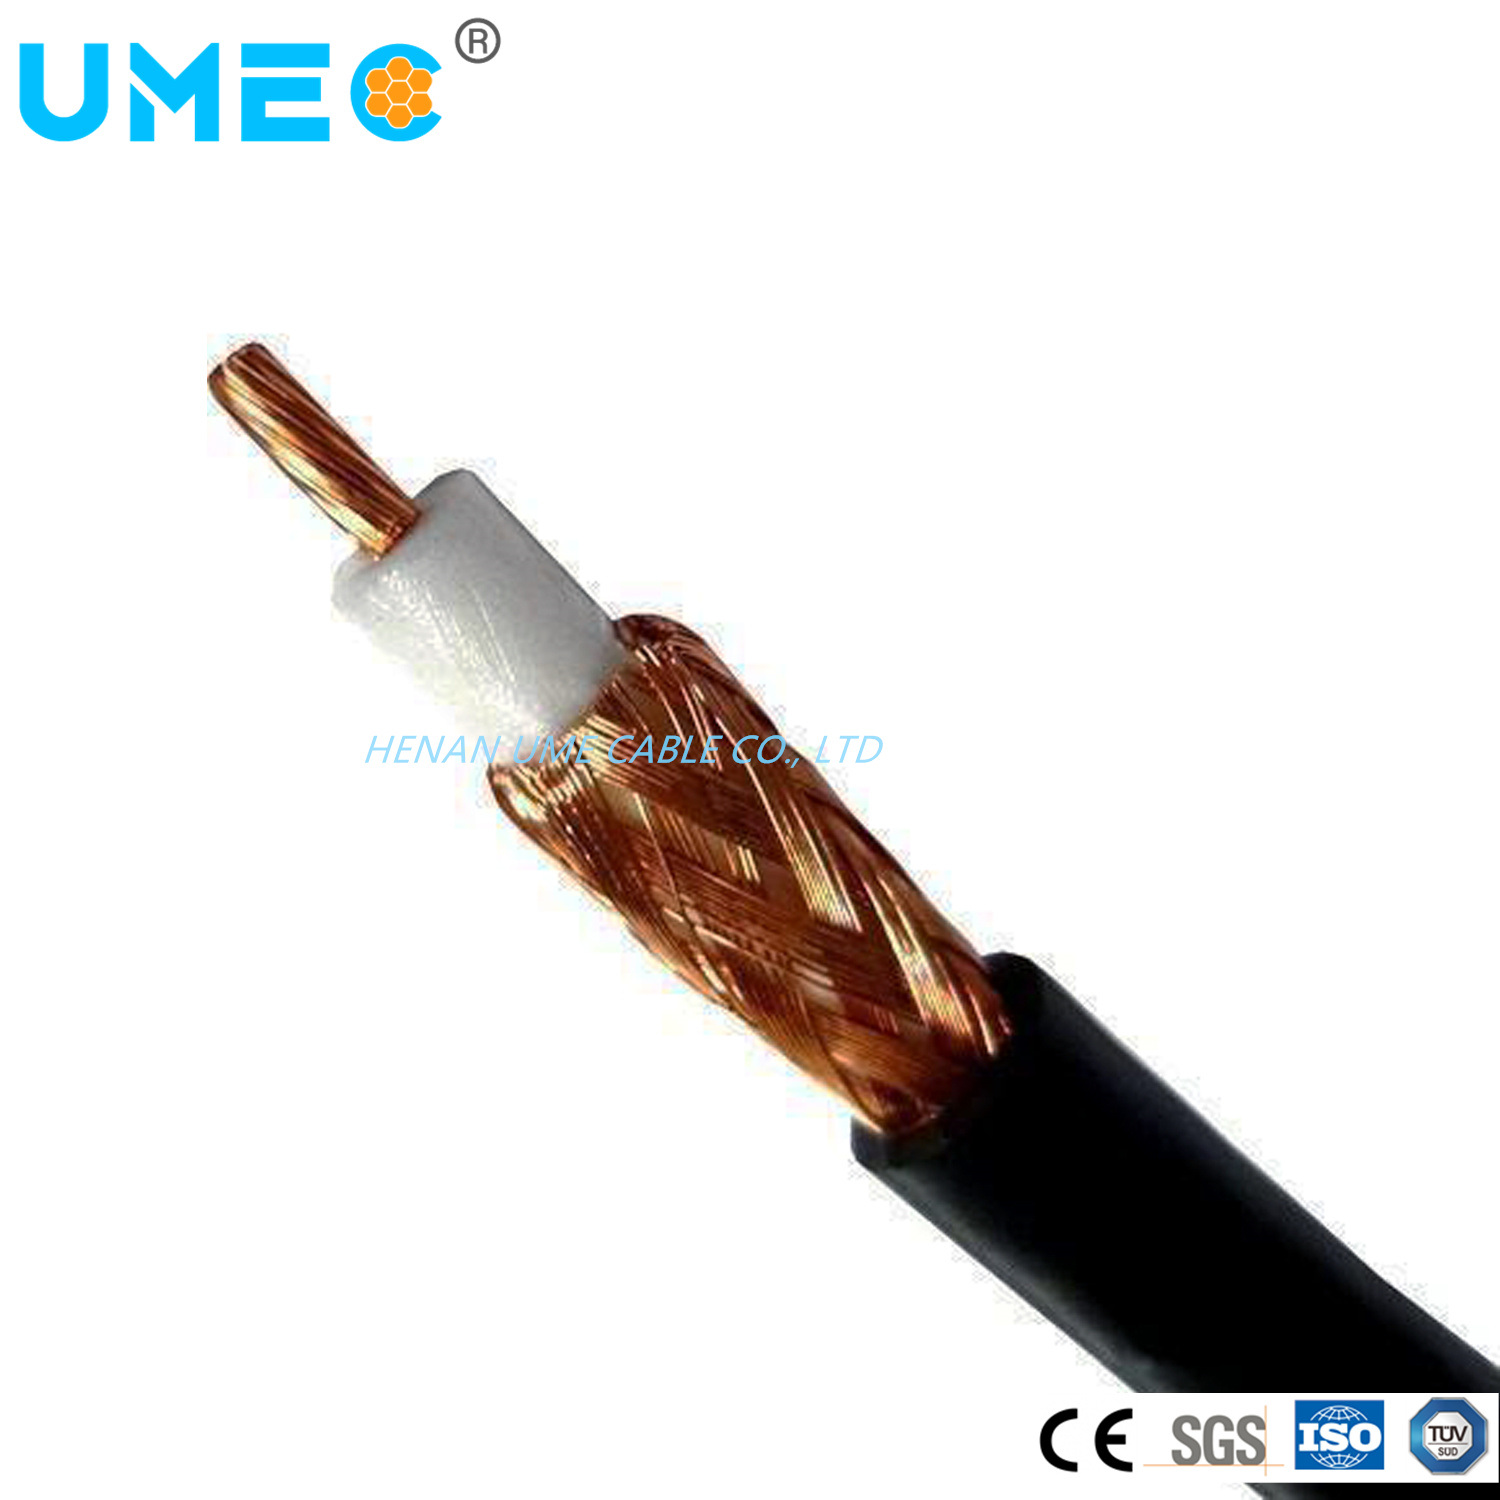 Wholesale HDMI Telecommunication Cable Silver-Coated Copper Conductor Braiding Cable 0.58mm/ 0.59mm/ 1.02mm/ 1.33mm Coaxial Cable